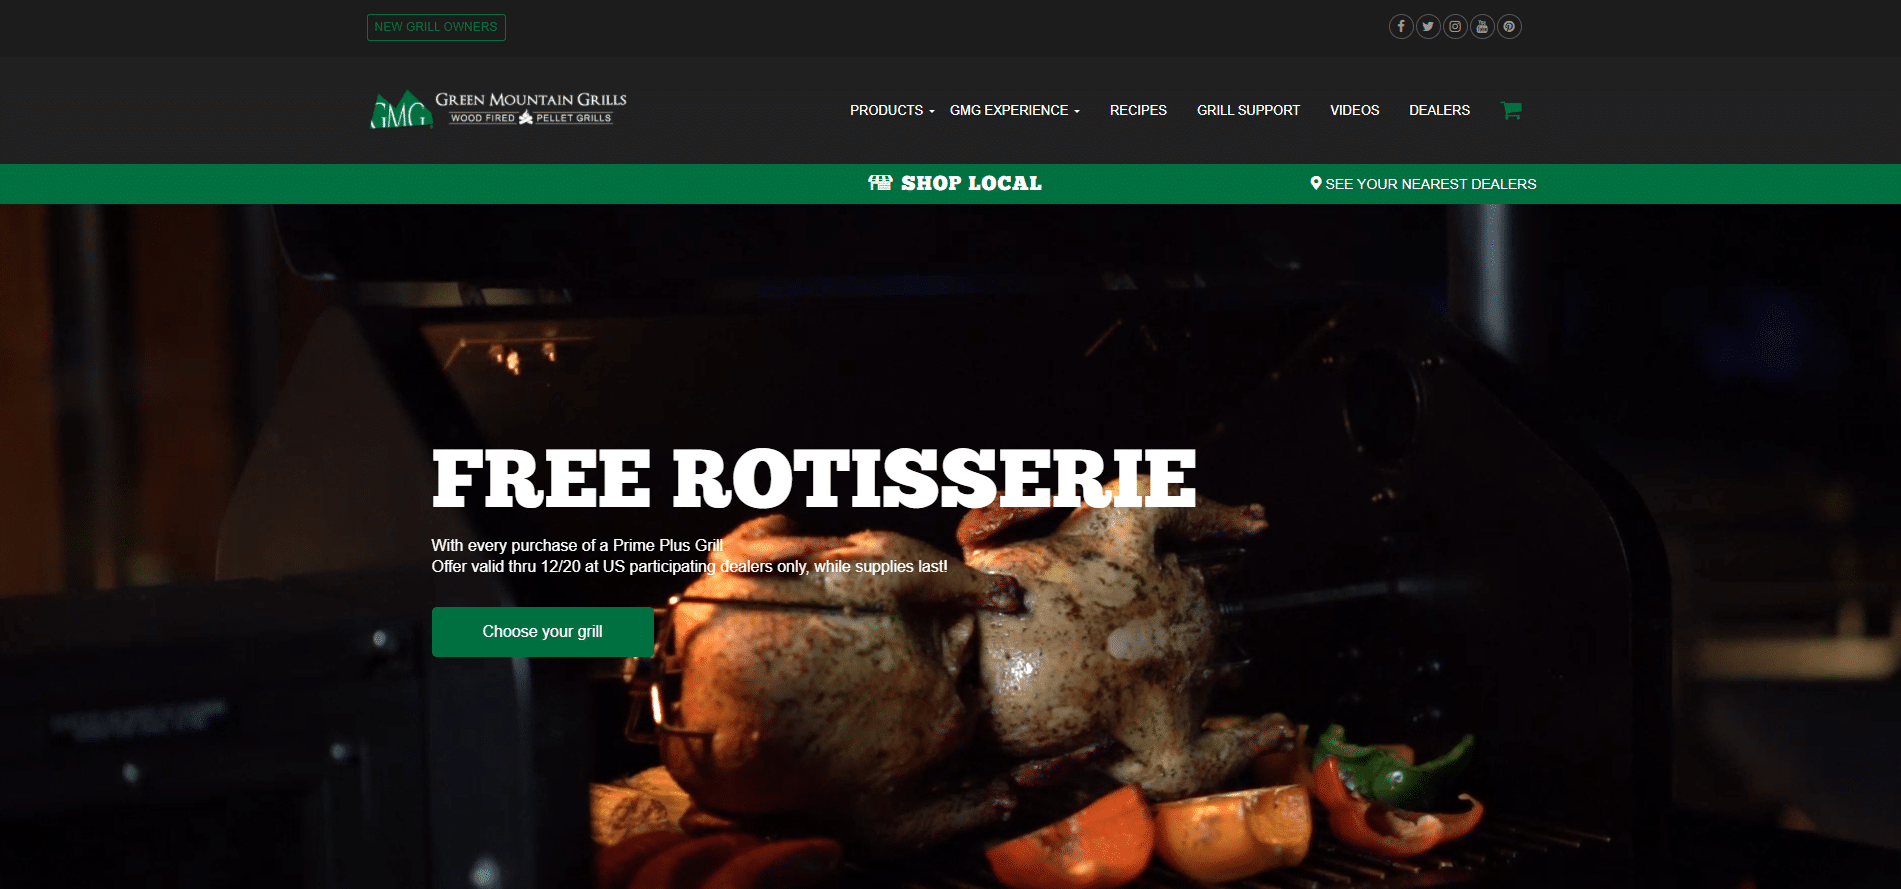 Green Mountain grills website modification with embedded video